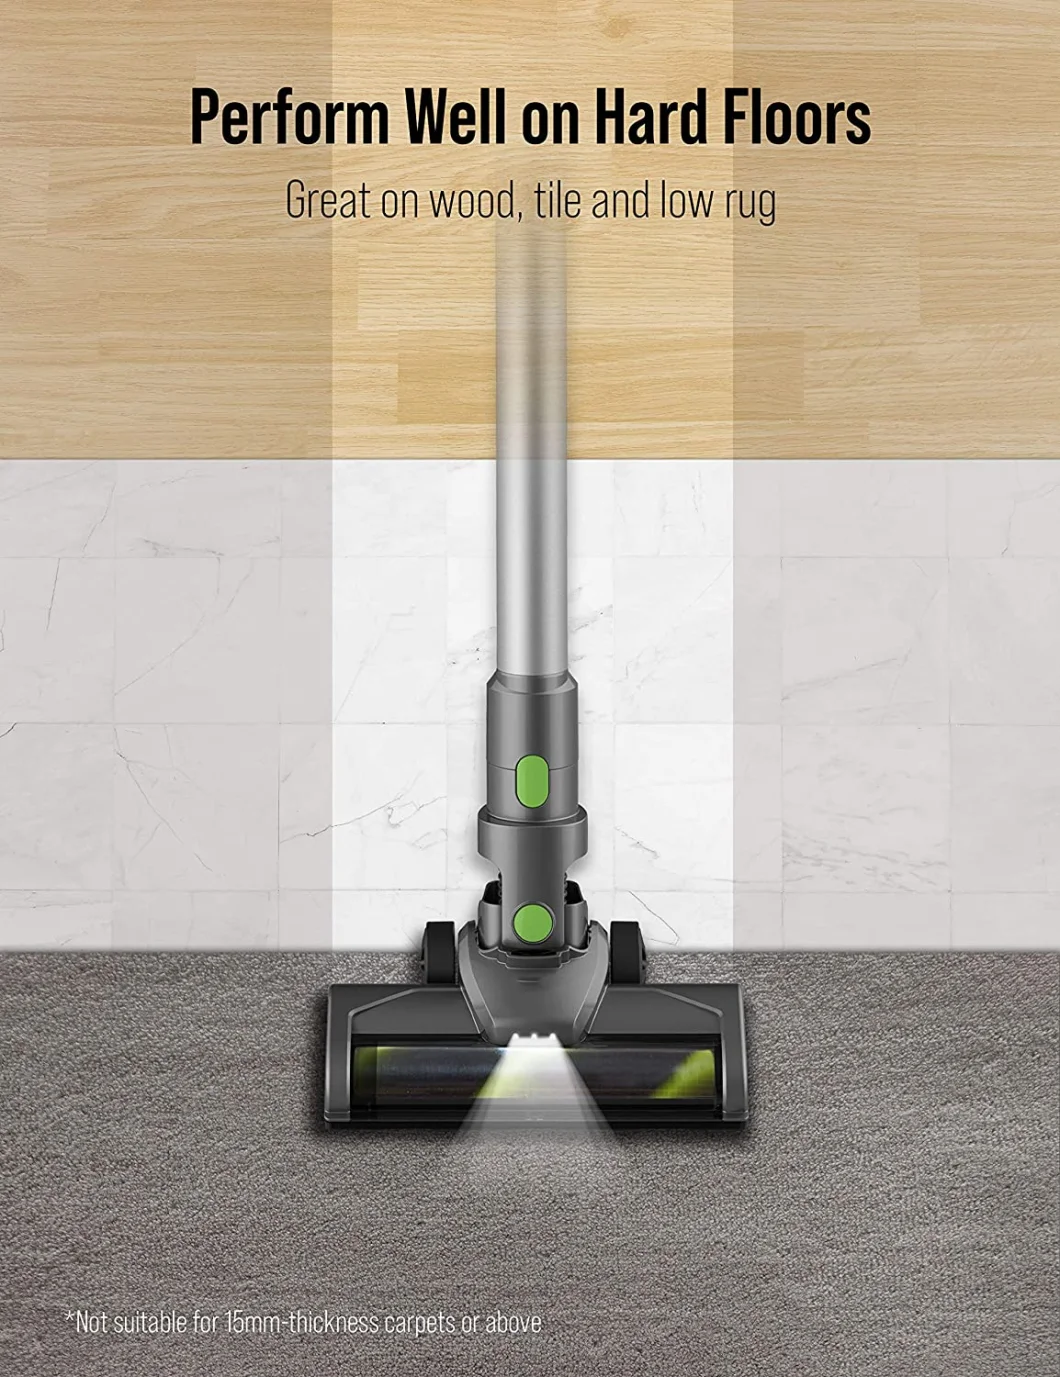 Cordless Vacuum Cleaner, 5 in 1 Stick Vacuum Cleaner with Washable HEPA Filter, Lightweight Bagless Vacuum Cleaner with LED Screen, Rechargeable Battery